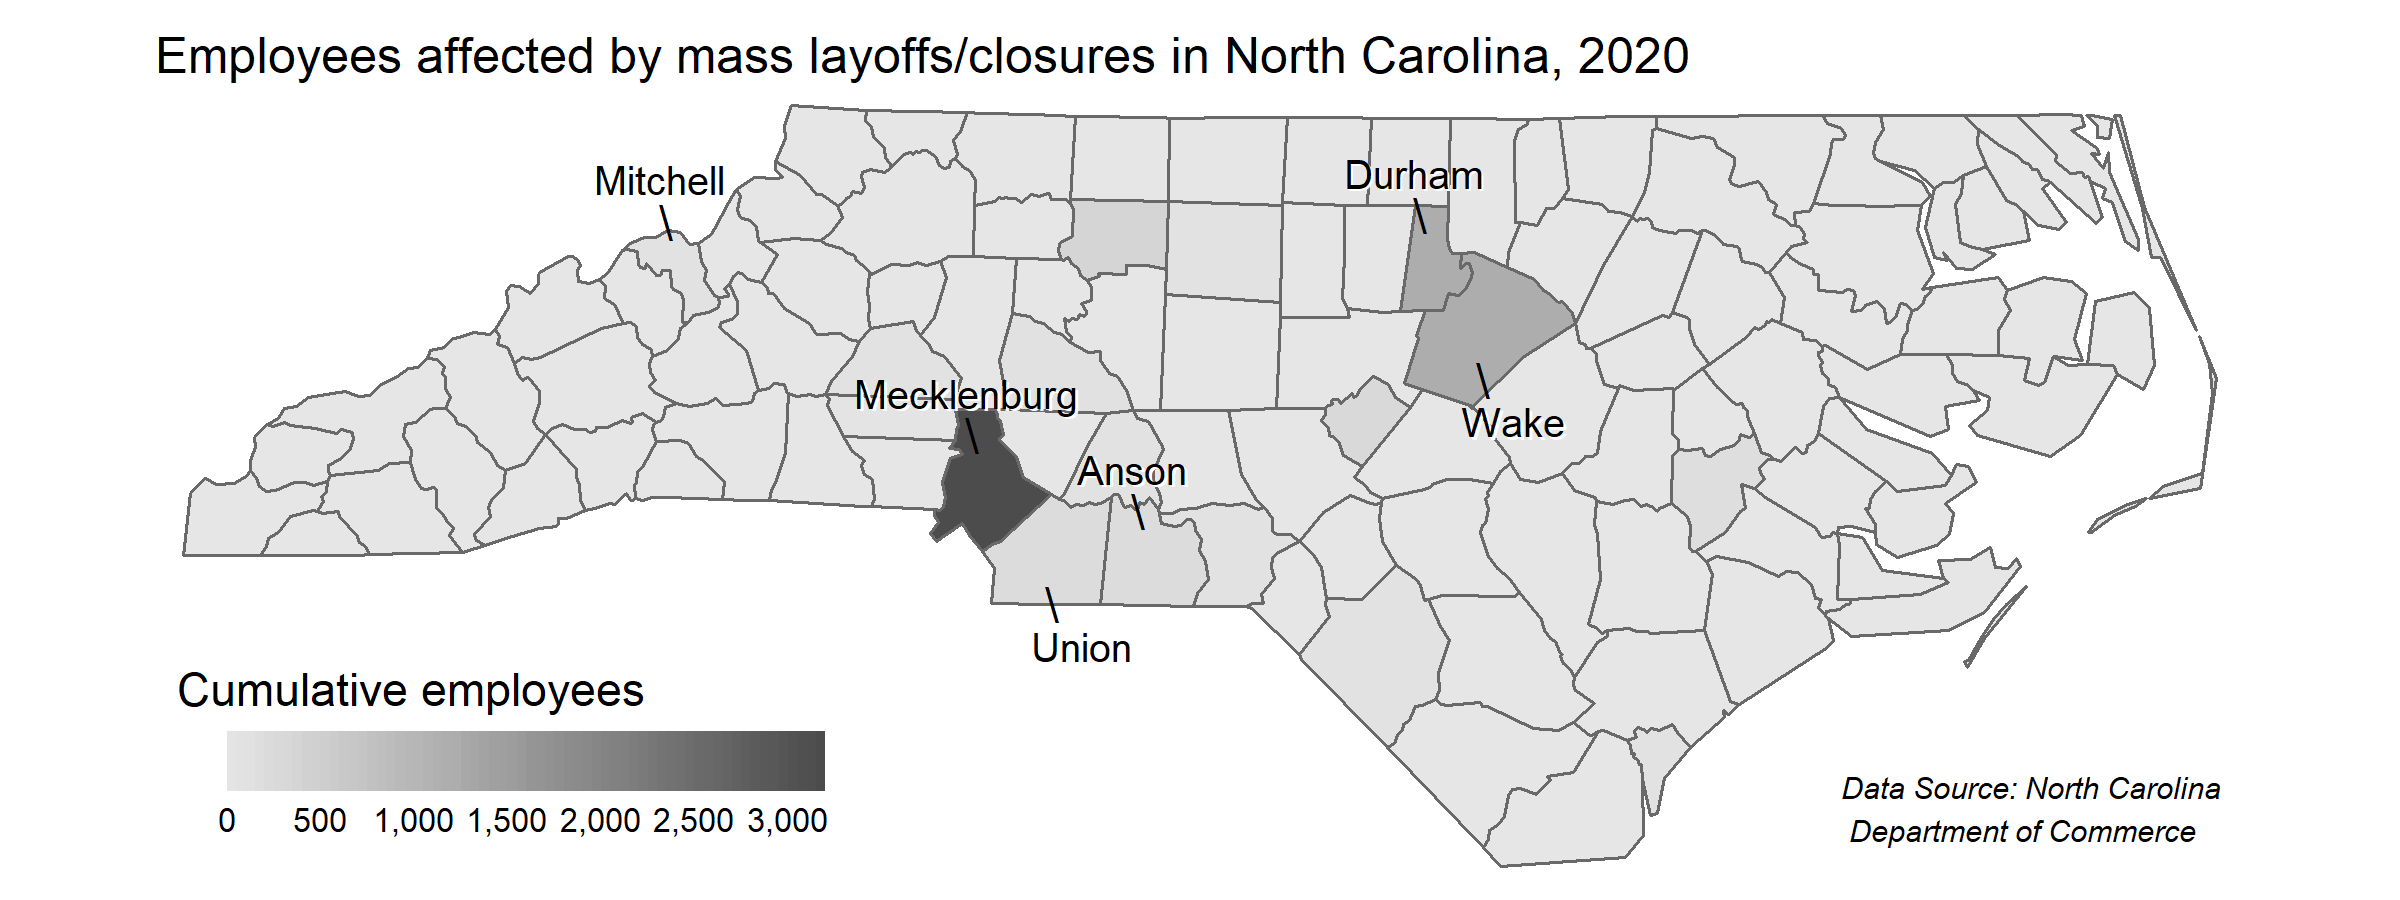 Figure 2: Map of North Carolina counties with total employees affected by mass layoffs/closures. Durham, Wake, and Mecklenburg have the highest totals, represented in dark gray.